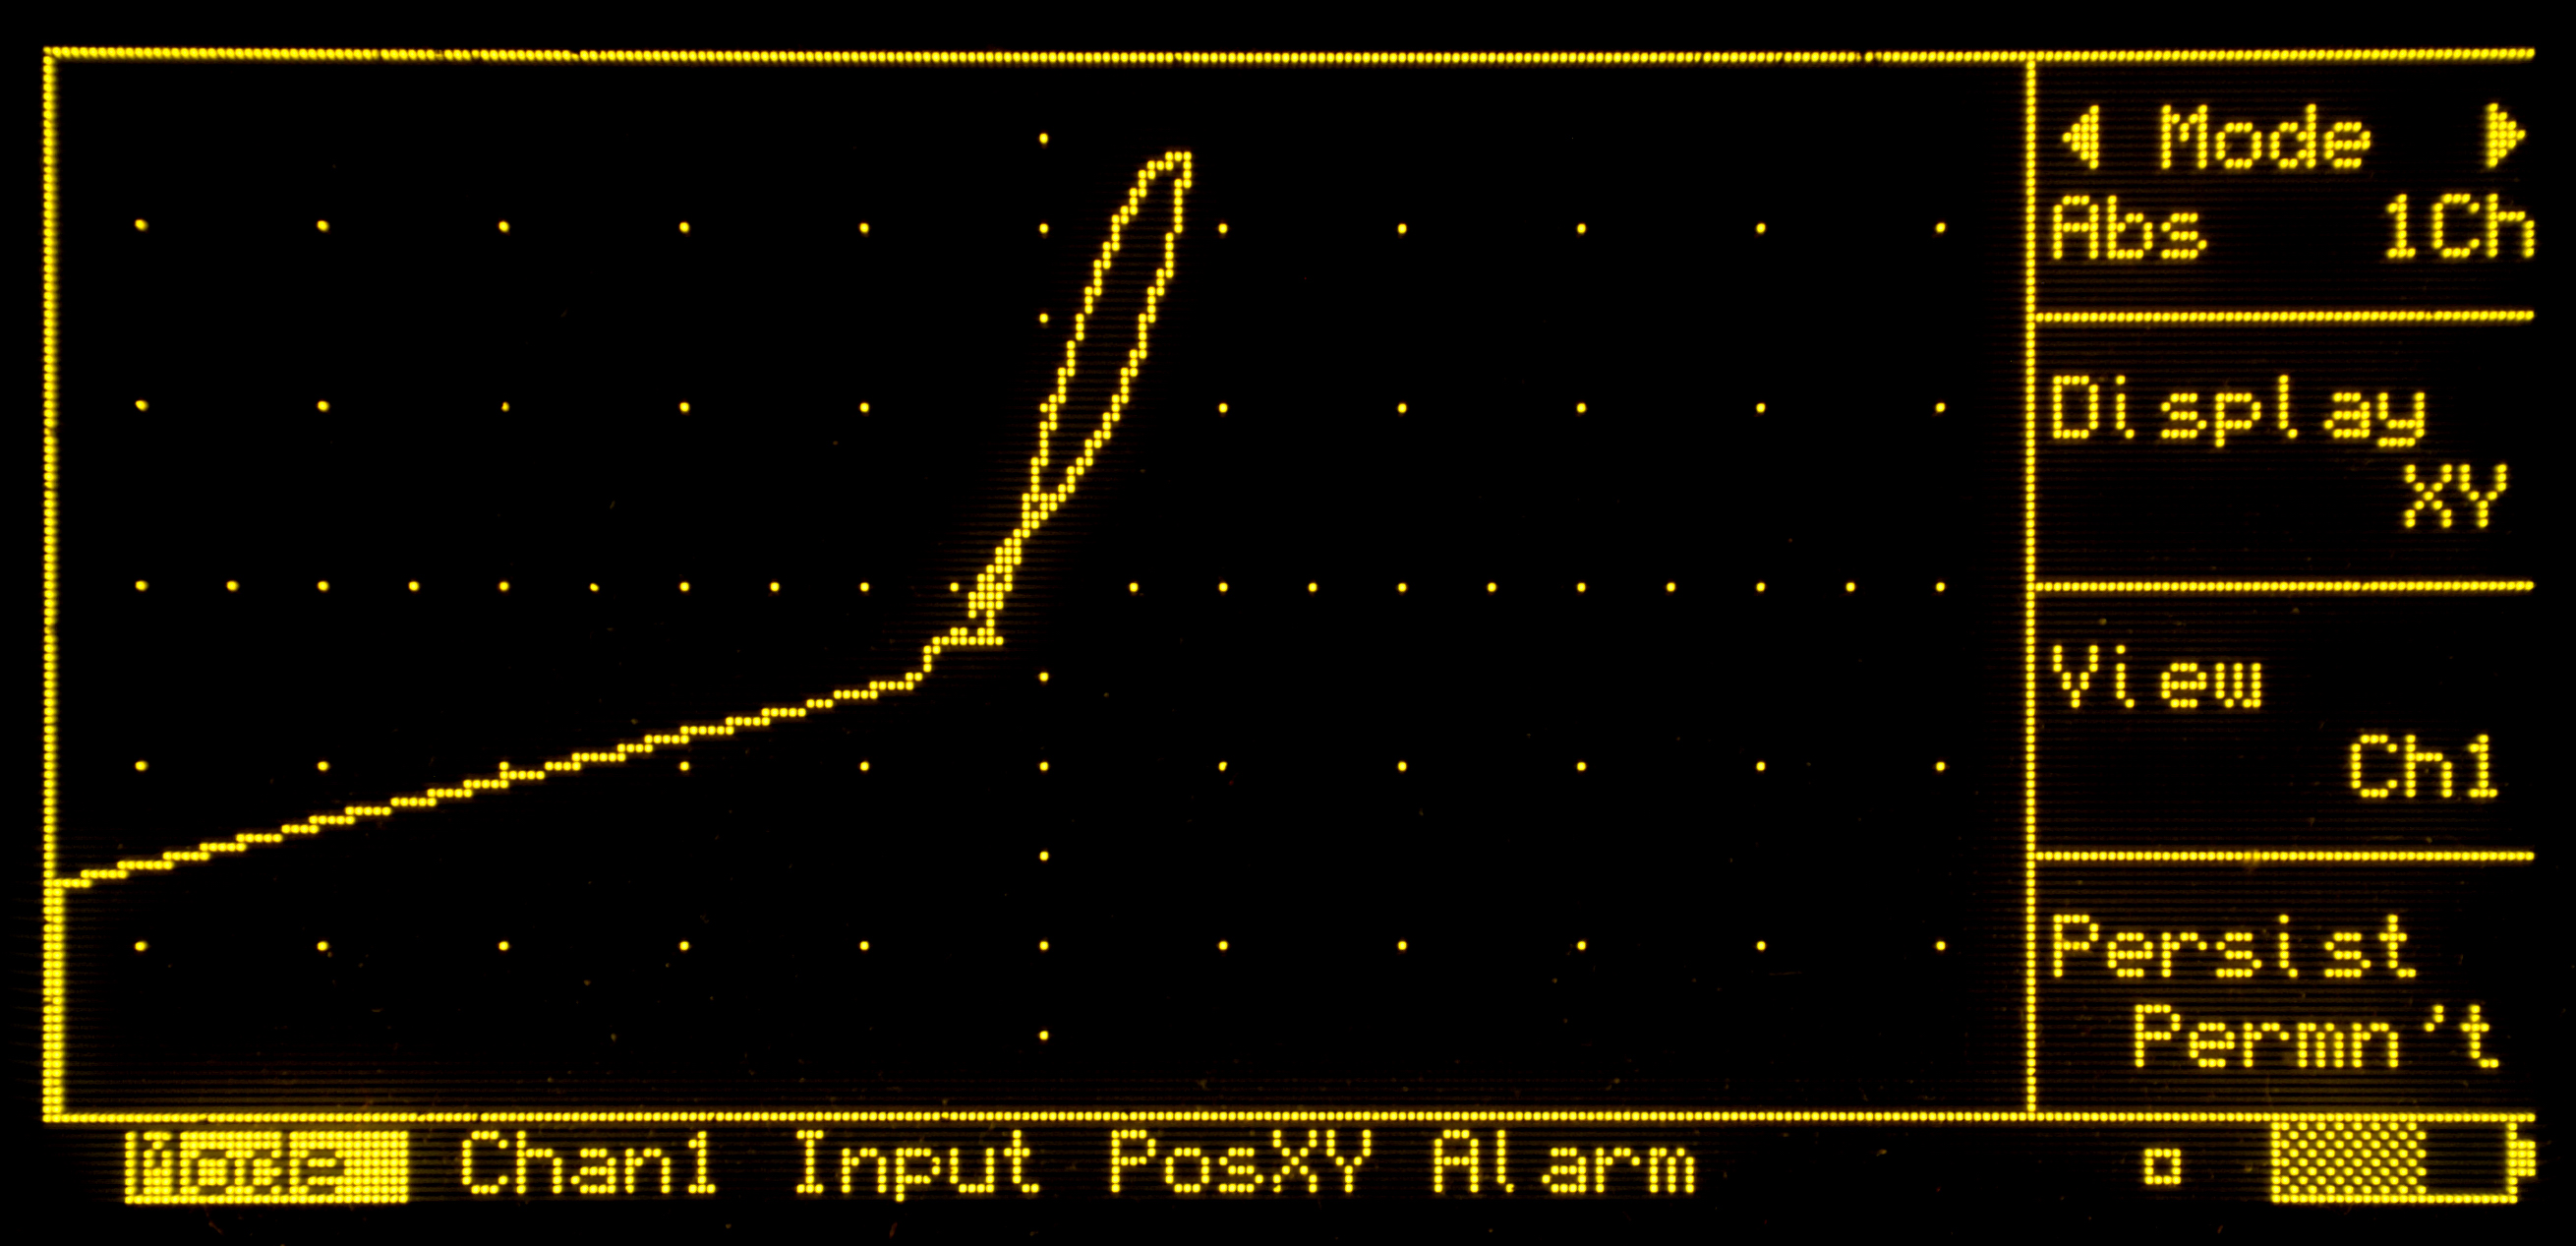 Example of Eddy current signal taken from Phasec 2200 system which indicates defective weld 